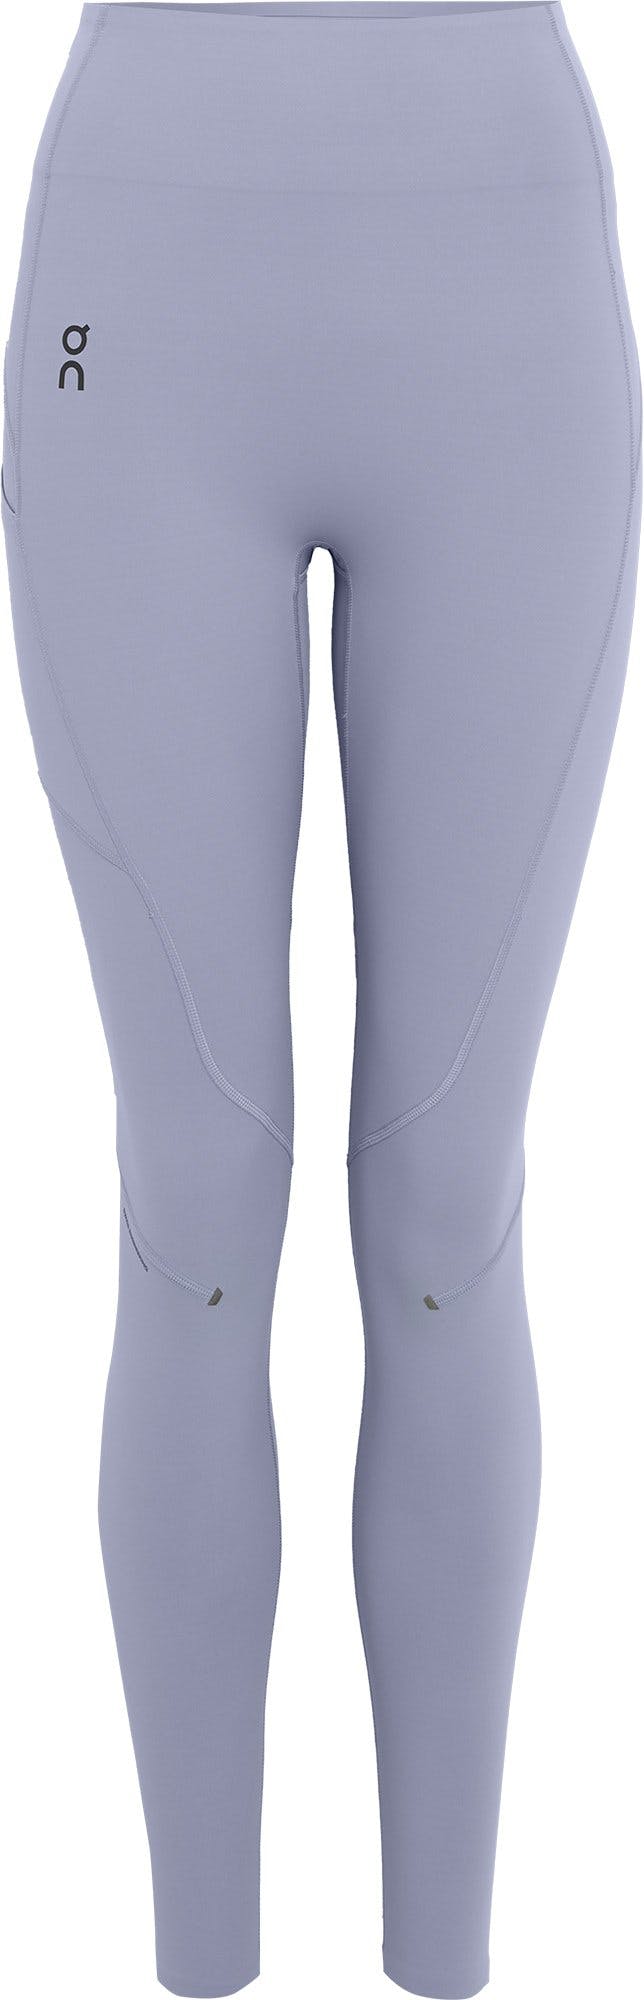 Product image for Movement Long Tights - Women's